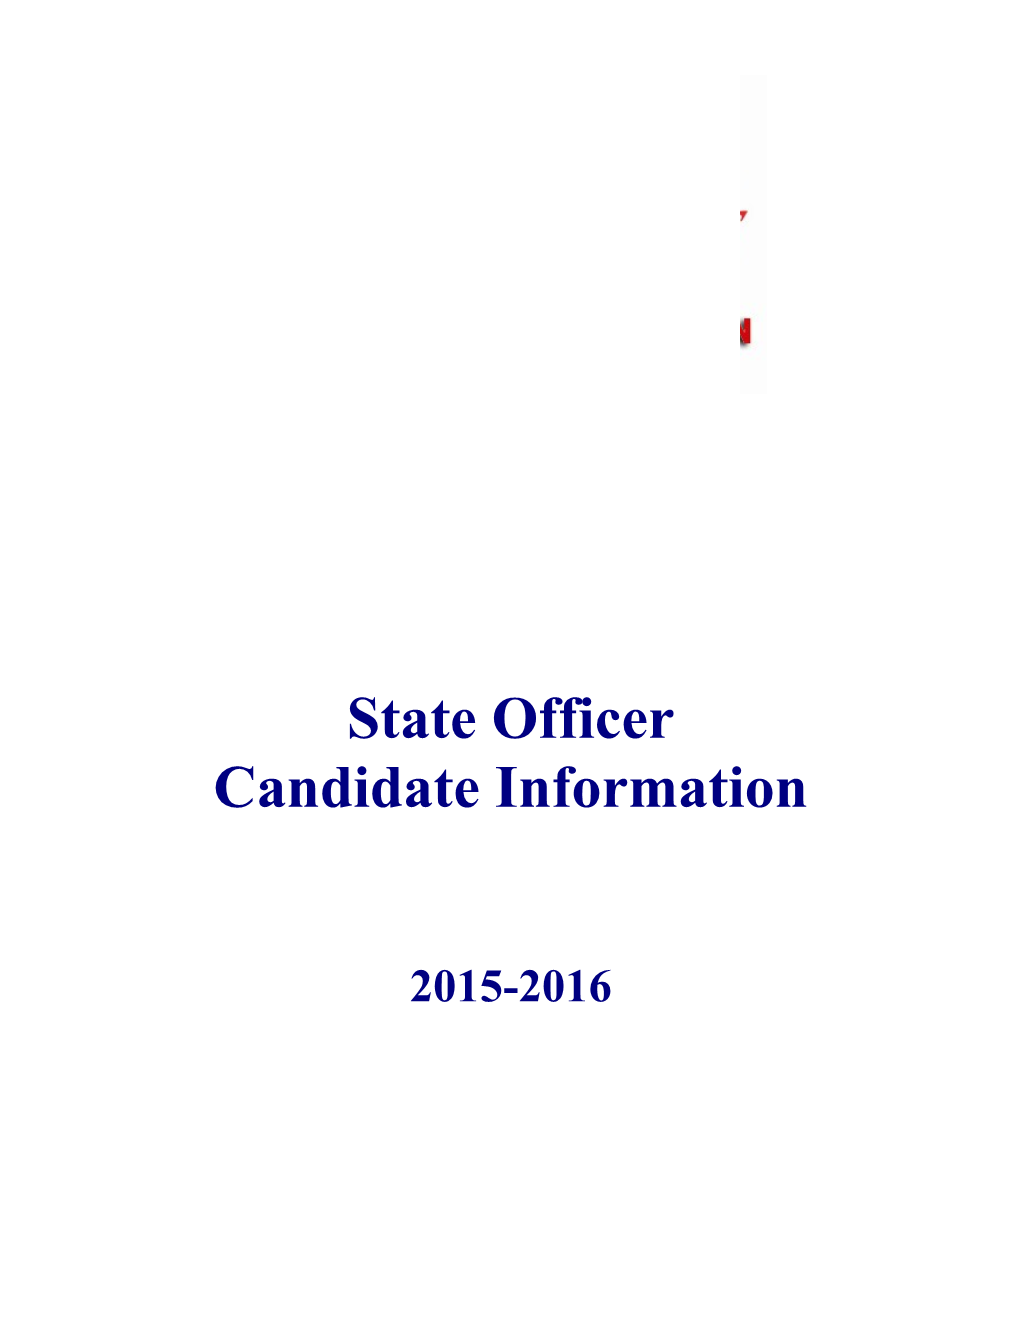 2015-2016 State Officer Candidate Informationpage 1 of 12